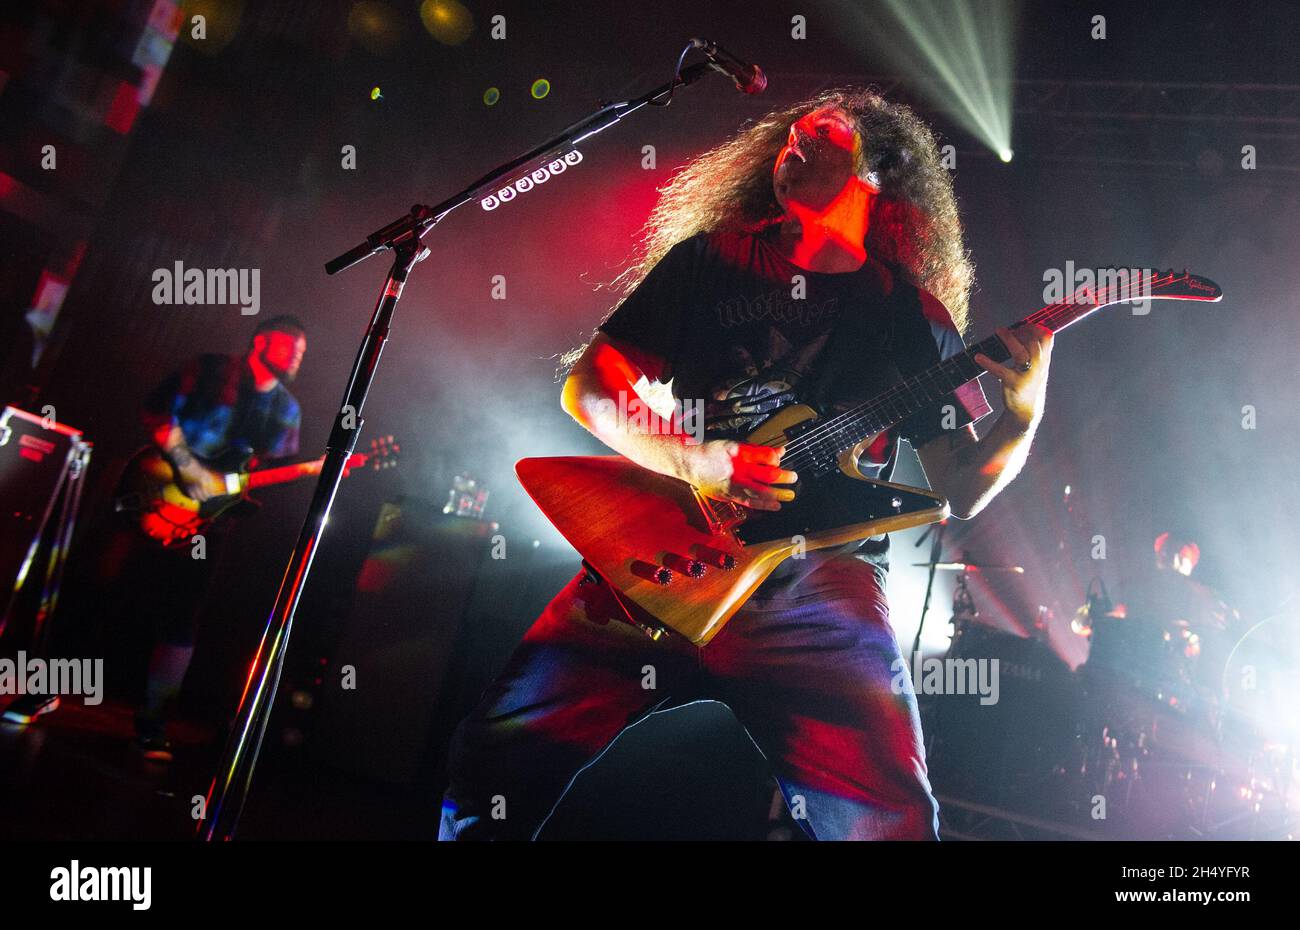 Claudio Sanchez of Coheed and Cambria performs live on stage on 14 October 2018 at the O2 Academy in Birmingham, England. Picture date: Sunday 14 October, 2018. Photo credit: Katja Ogrin/ EMPICS Entertainment. Stock Photo